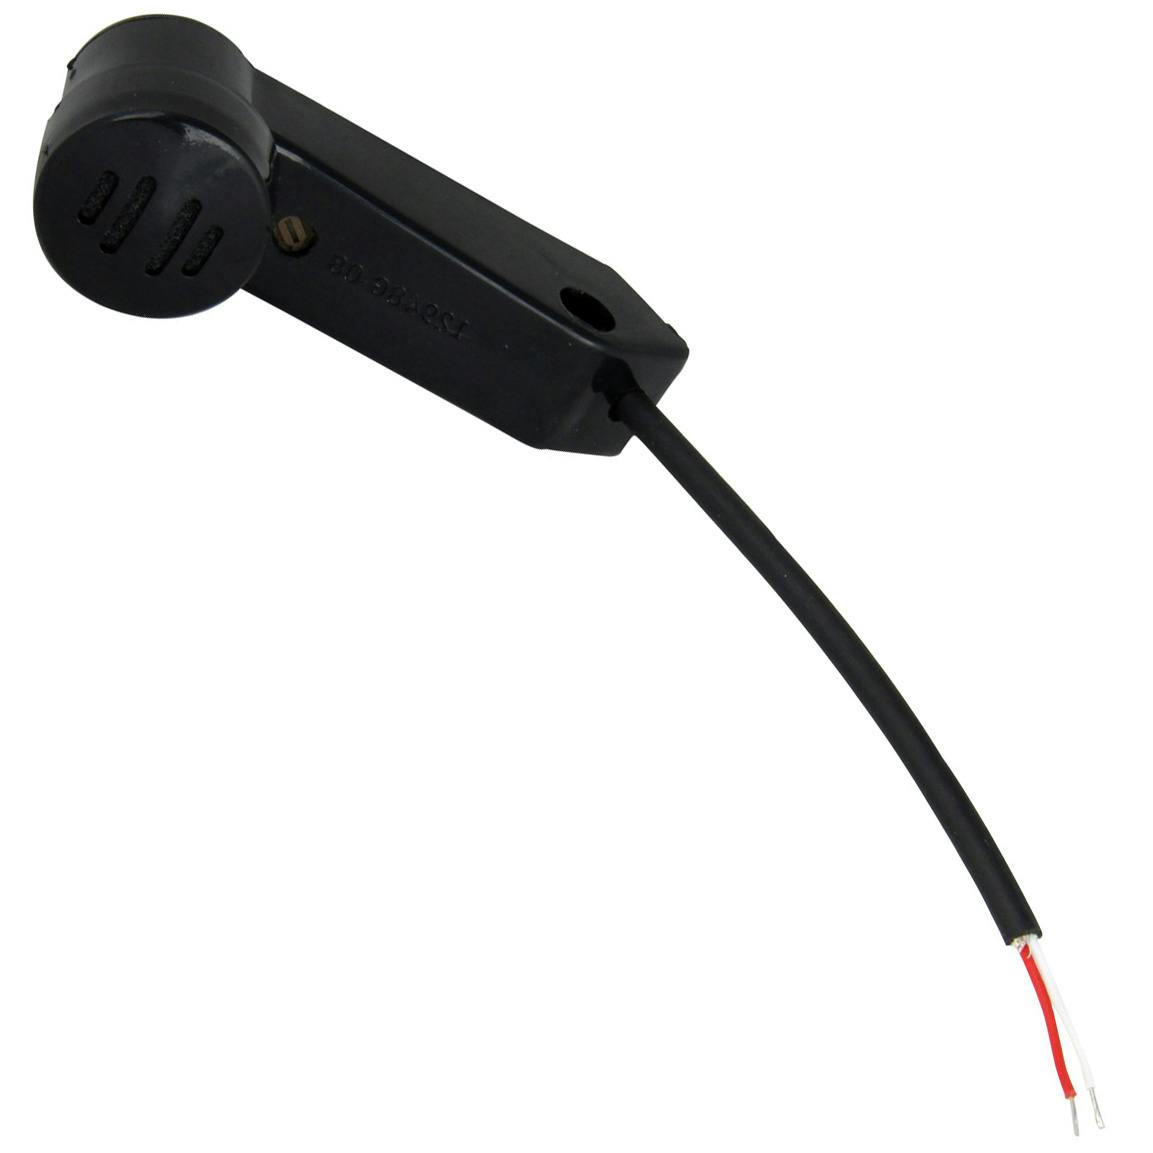 HEADSET MICROPHONE | DC-1A w/ Male Pigtail